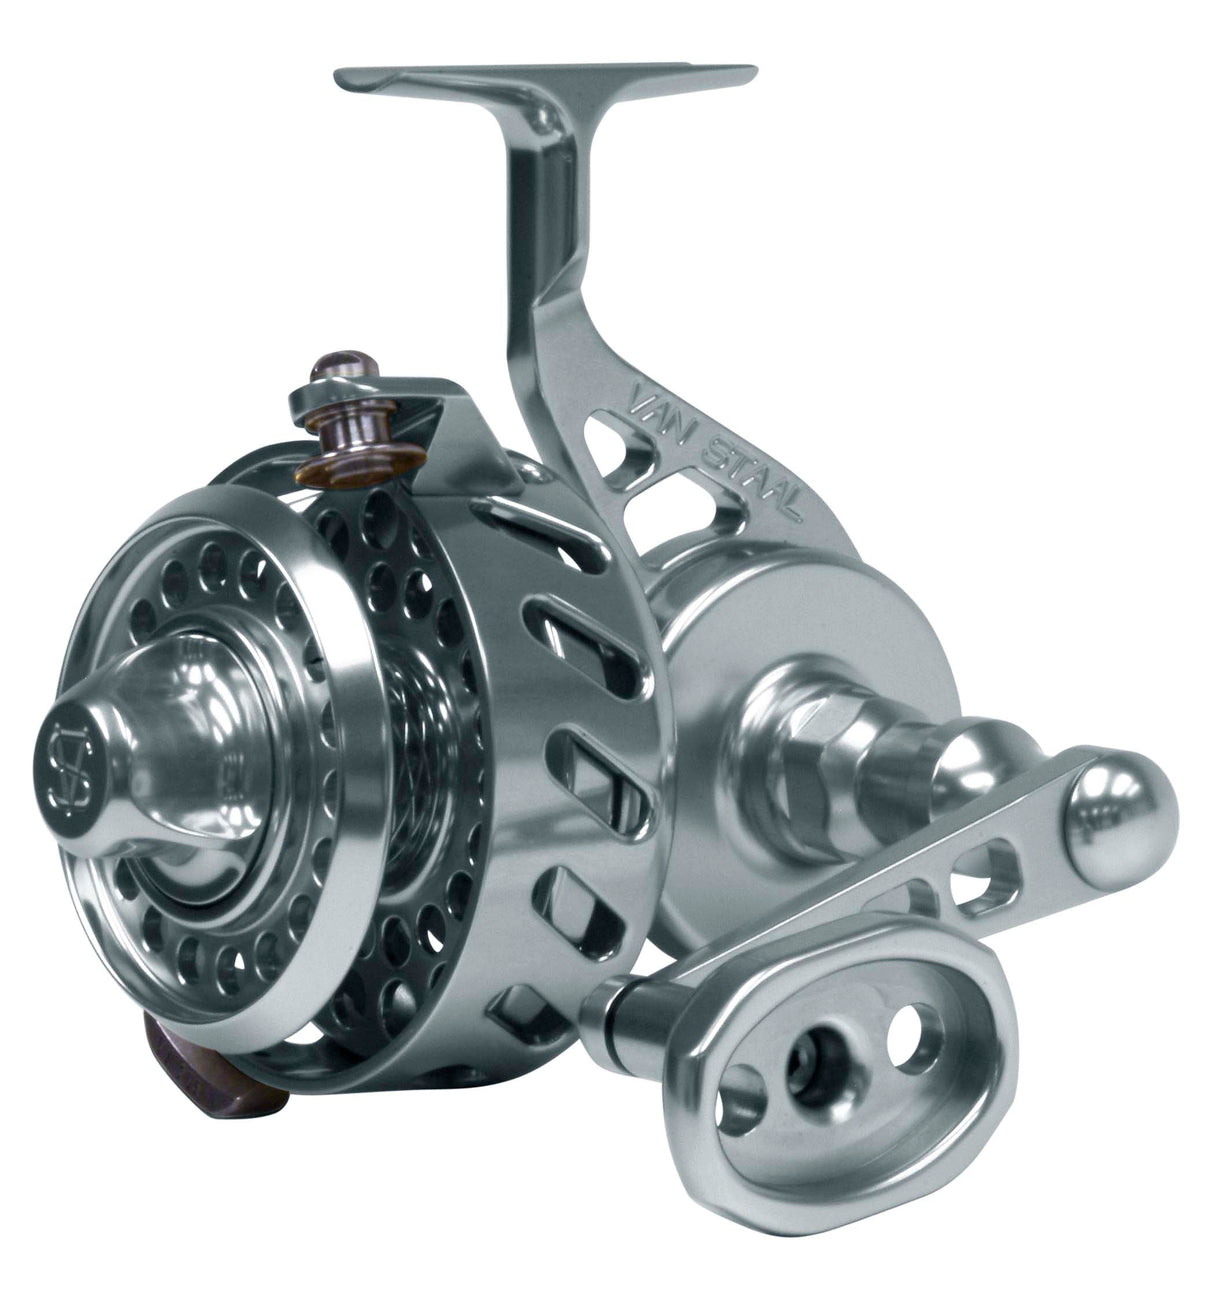 BUY A VAN STAAL X SERIES BAILESS SPINNING REEL & GET IT SPOOLED FOR FREE